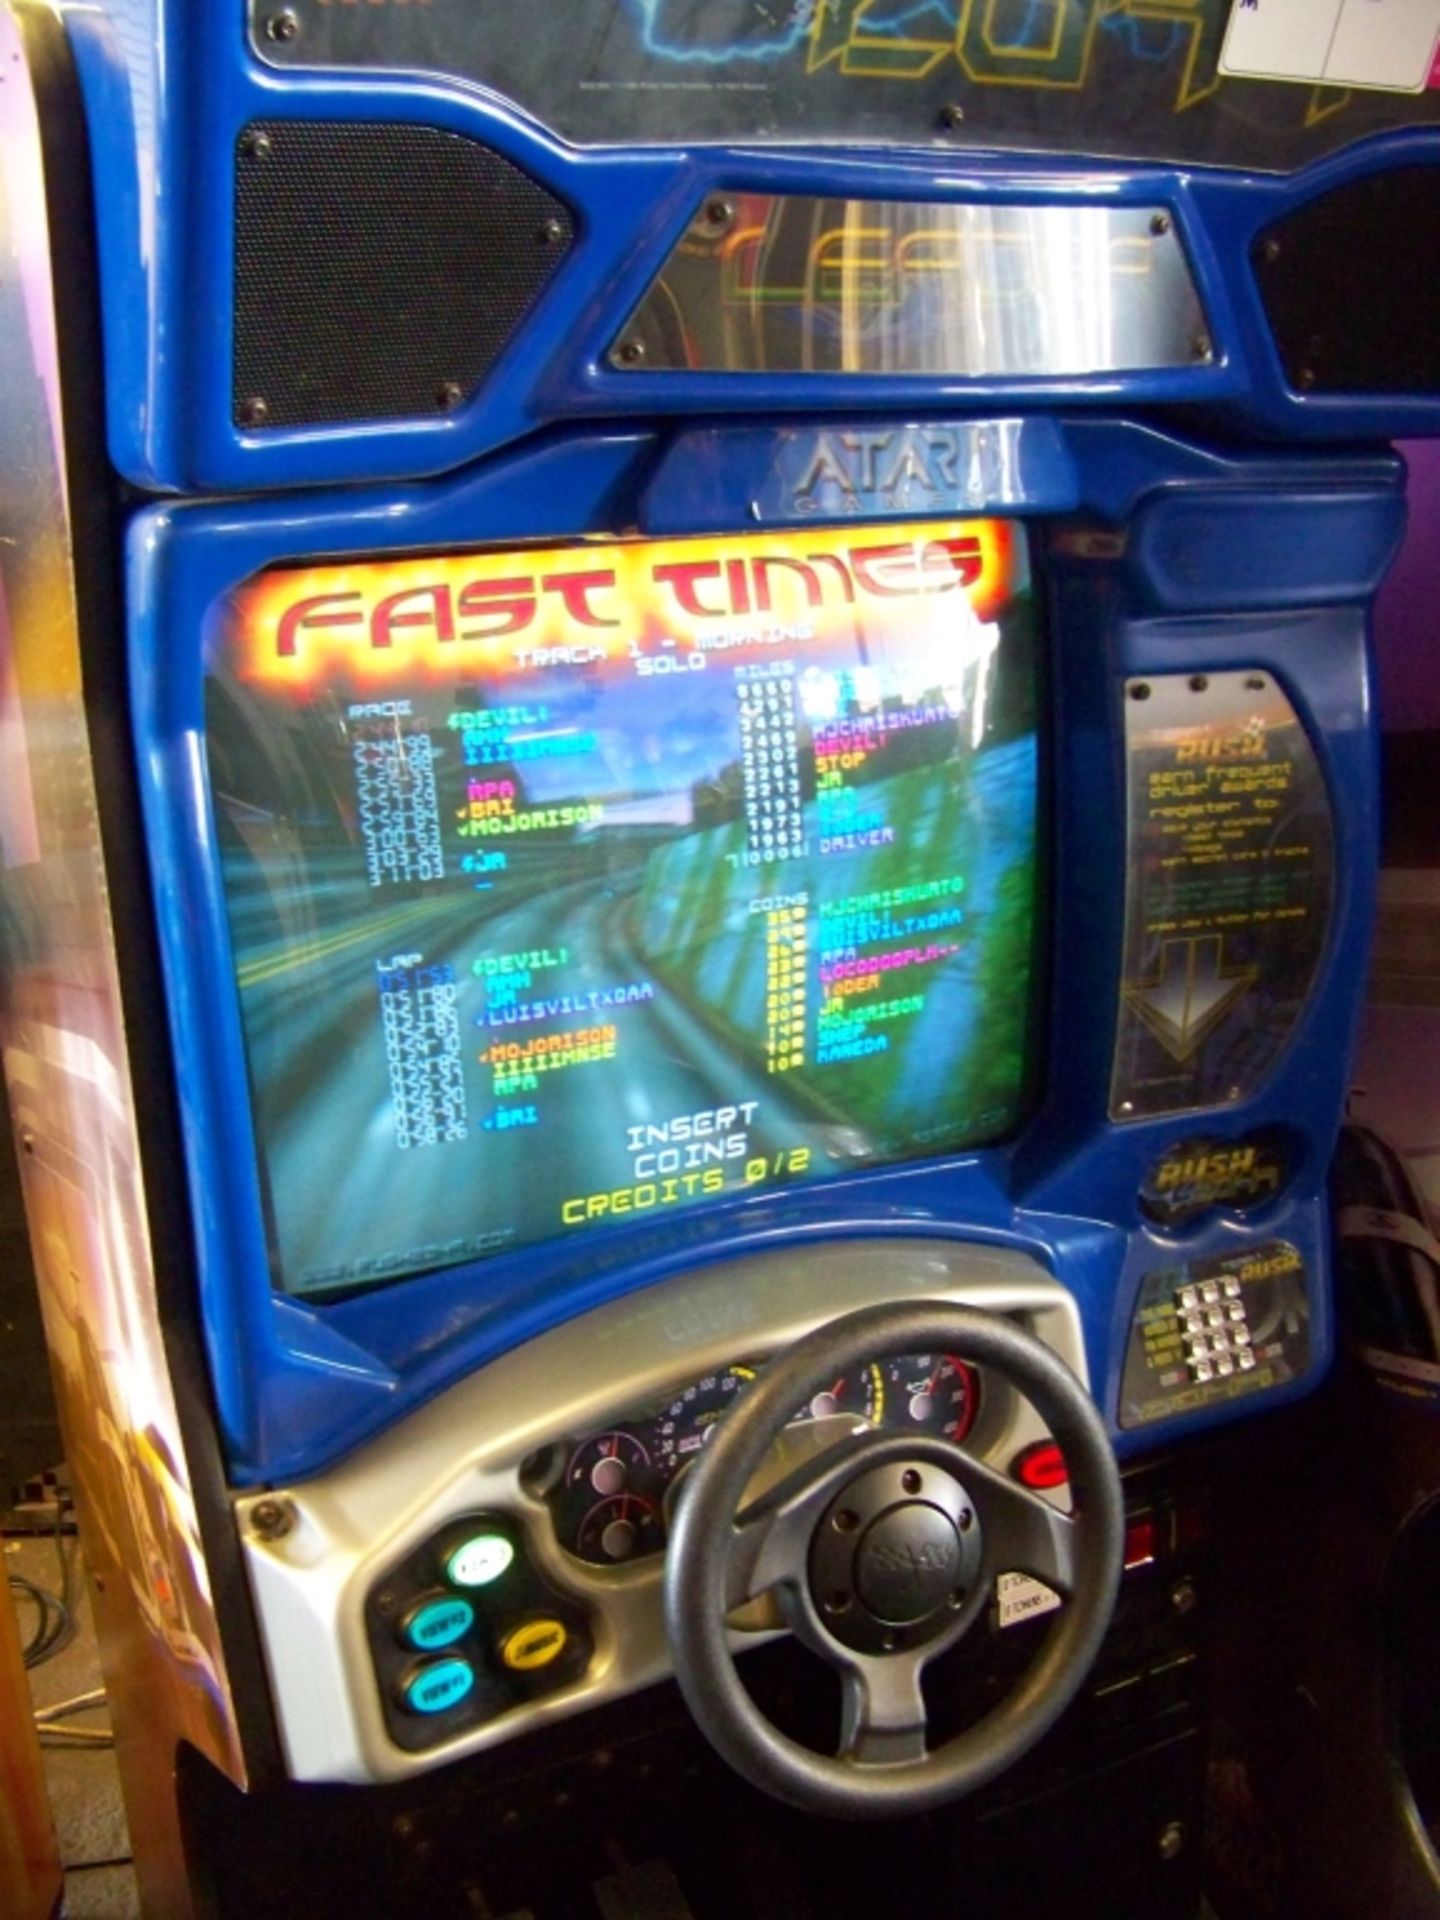 RUSH 2049 SITDOWN RACING ARCADE GAME ATARI Item is in used condition. Evidence of wear and - Image 2 of 4